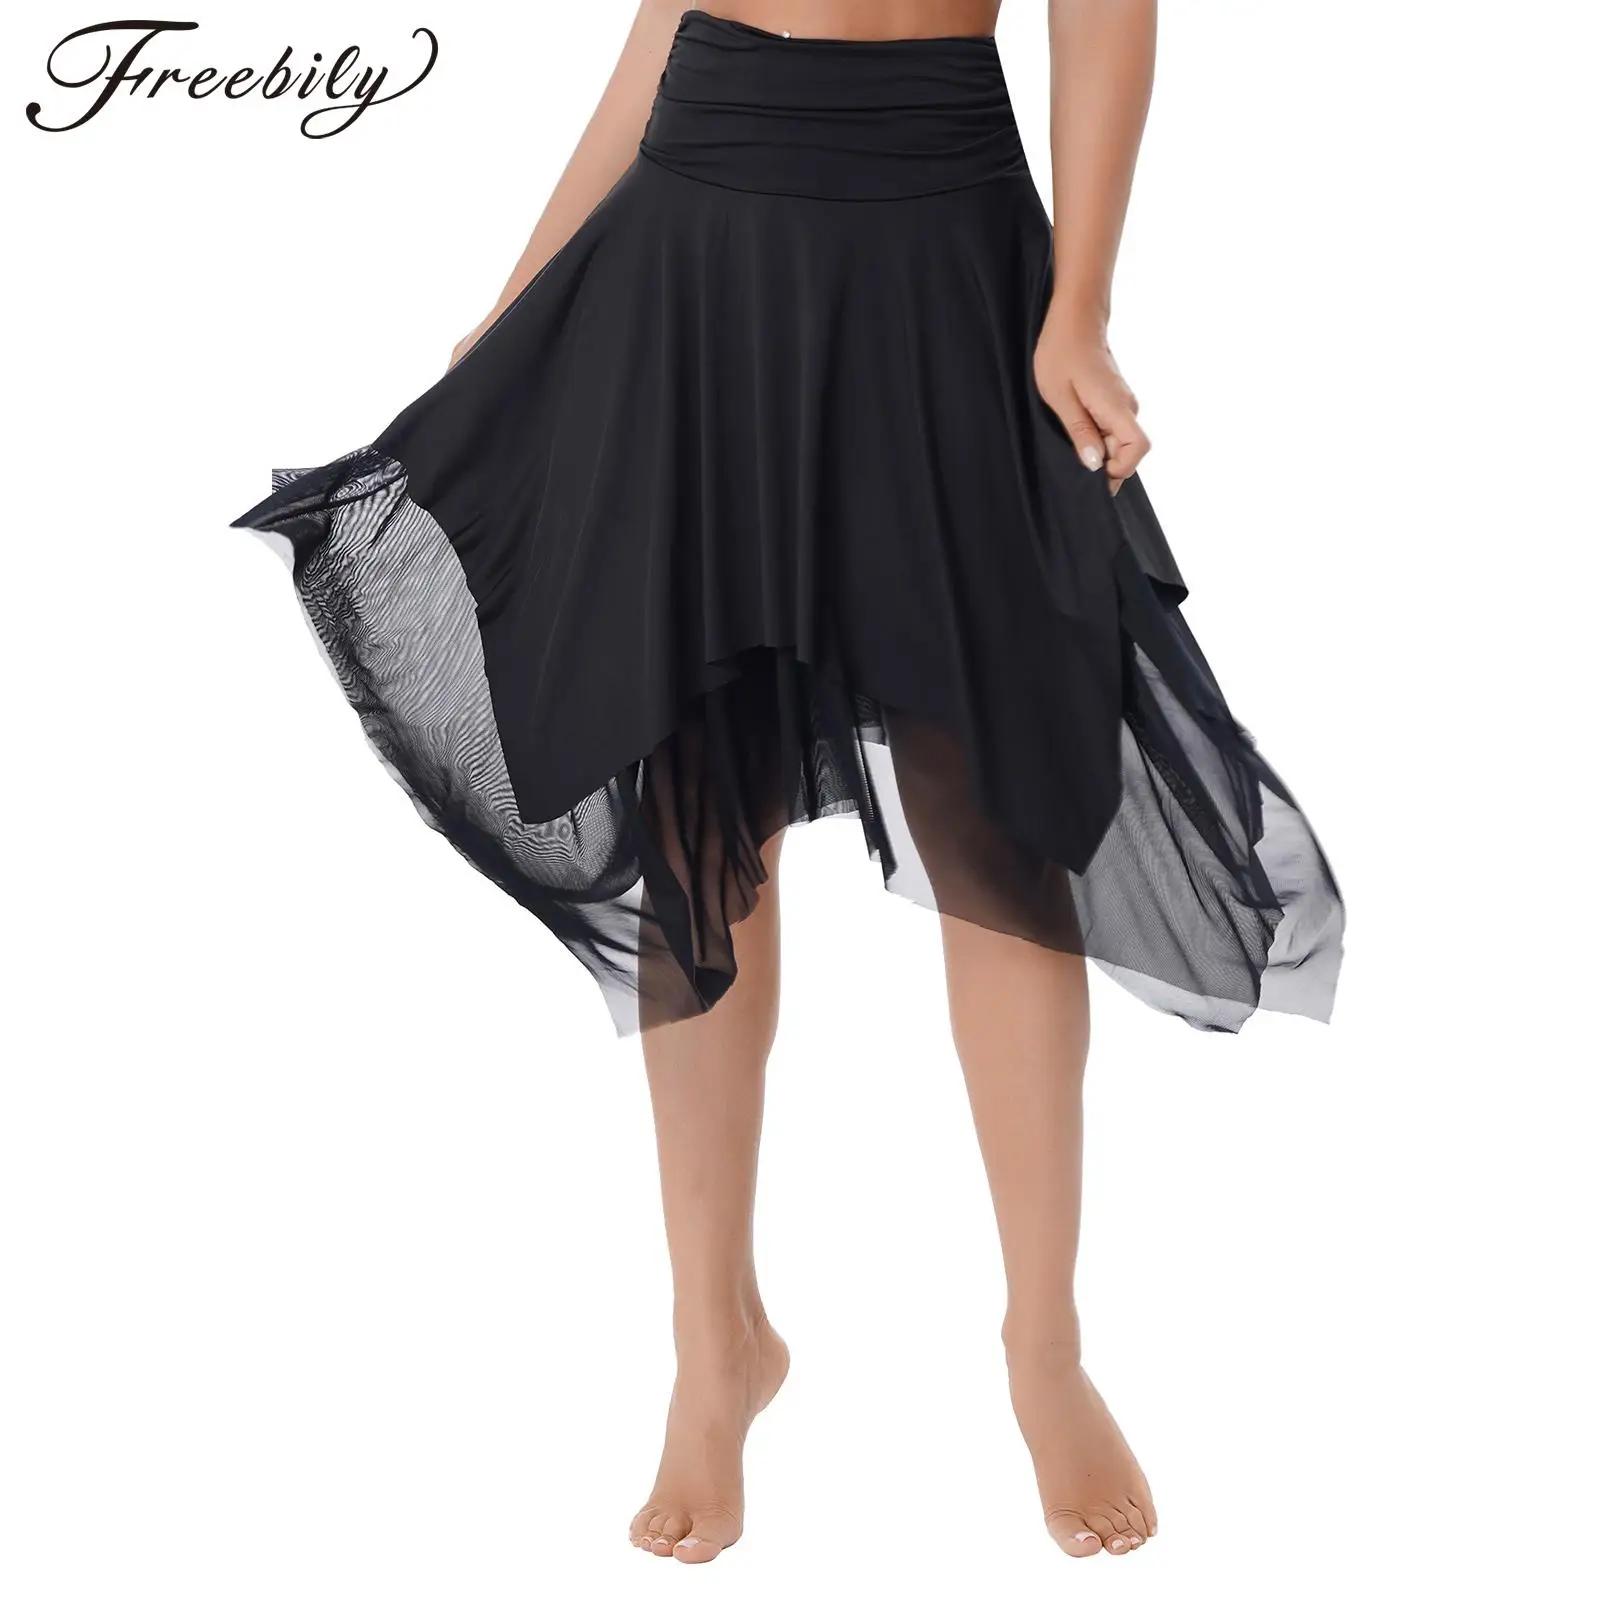 

Womens Pure Black Ruffled 2 Layers Mesh Breathable Lyrical Dance Skirts Ruched Waistband Asymmetrical Hem Skirts for Belly Dance